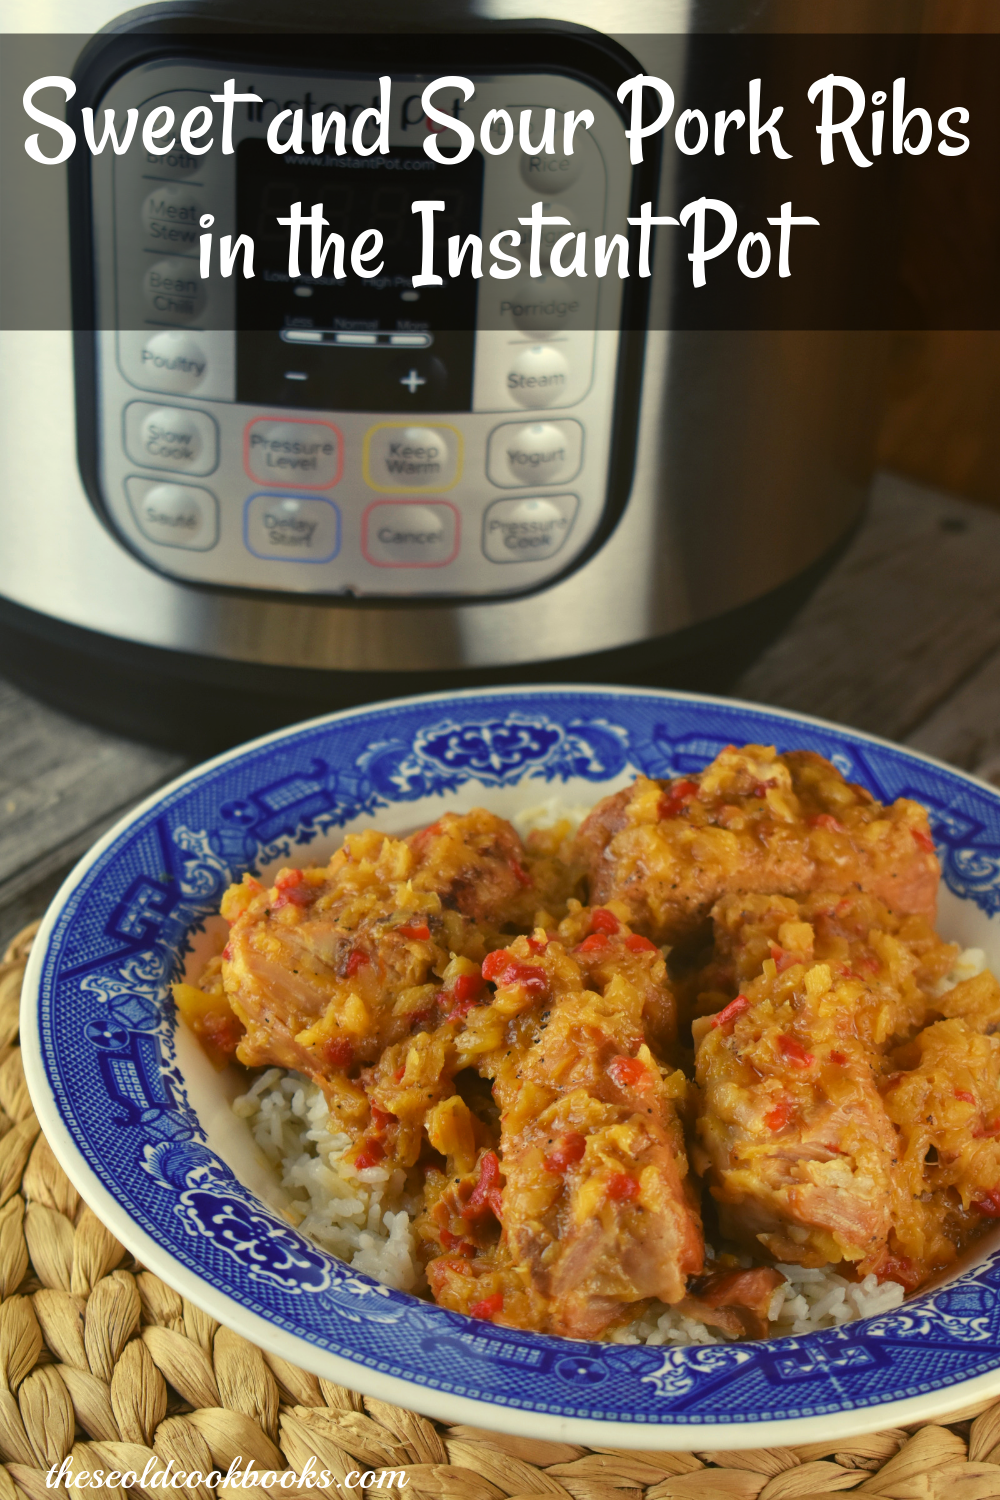 These Instant Pot Sweet and Sour Pork Spareribs are fork tender and melt in your mouth. The sauce is simple, and the cooking method quick with the help of an electric pressure cooker.  More importantly, this recipe is delicious even though it contains no fancy ingredients.